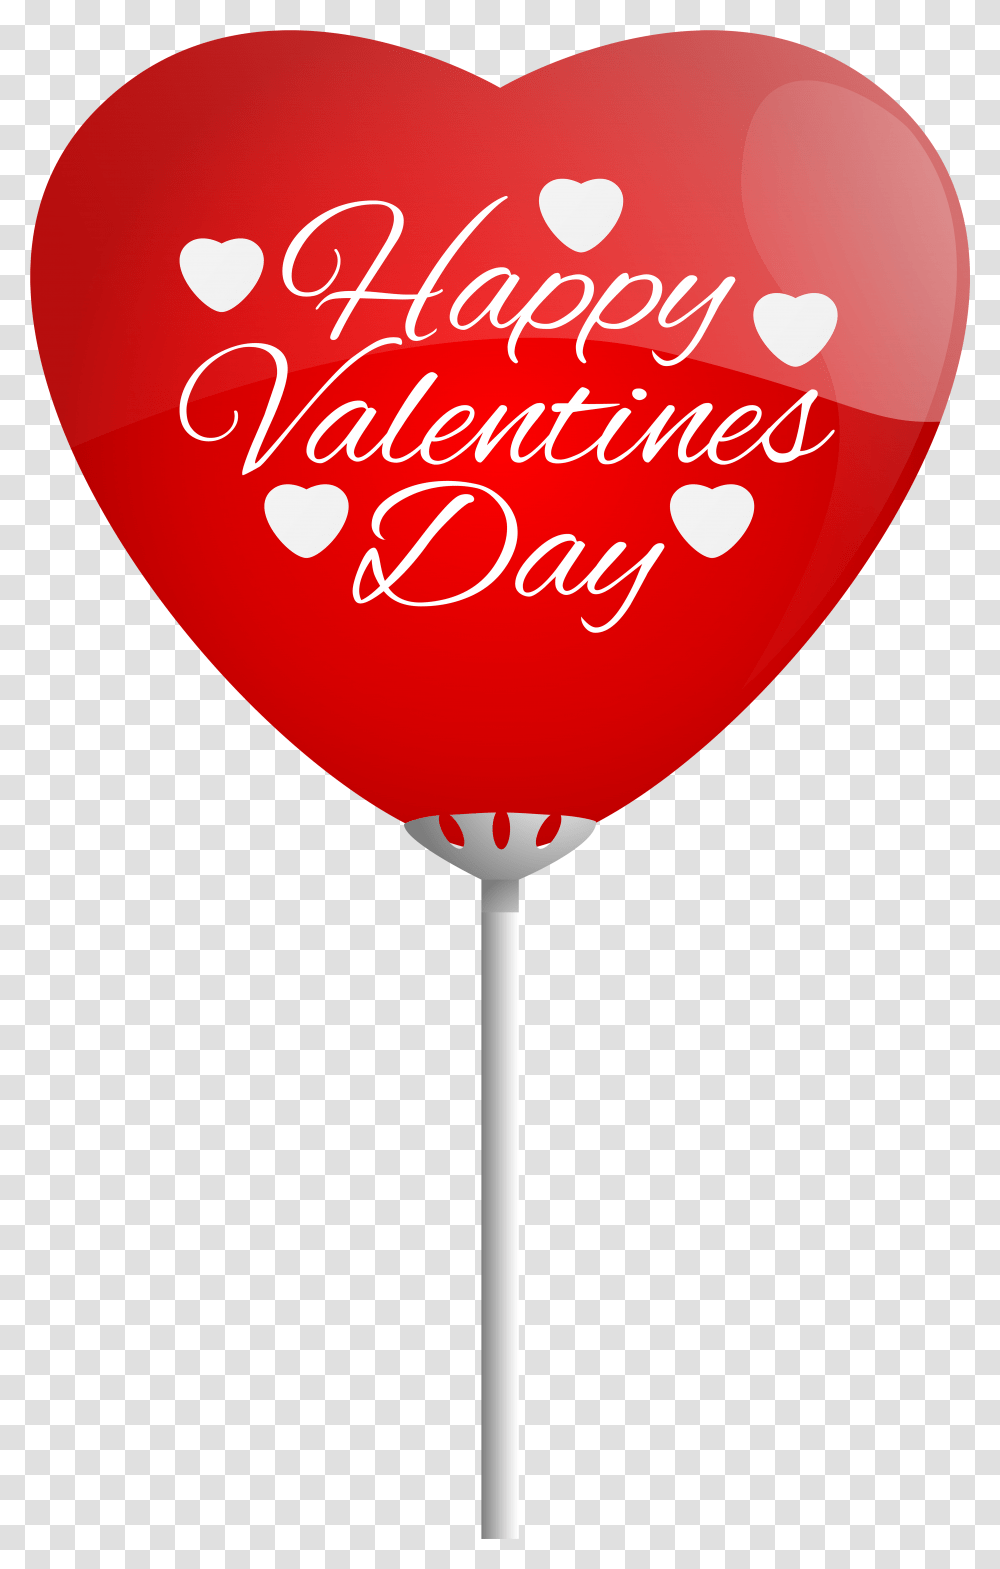 Happy Valentines Day Clipart Happy Valentines Day Balloon, Heart, Glass, Beverage, Drink Transparent Png